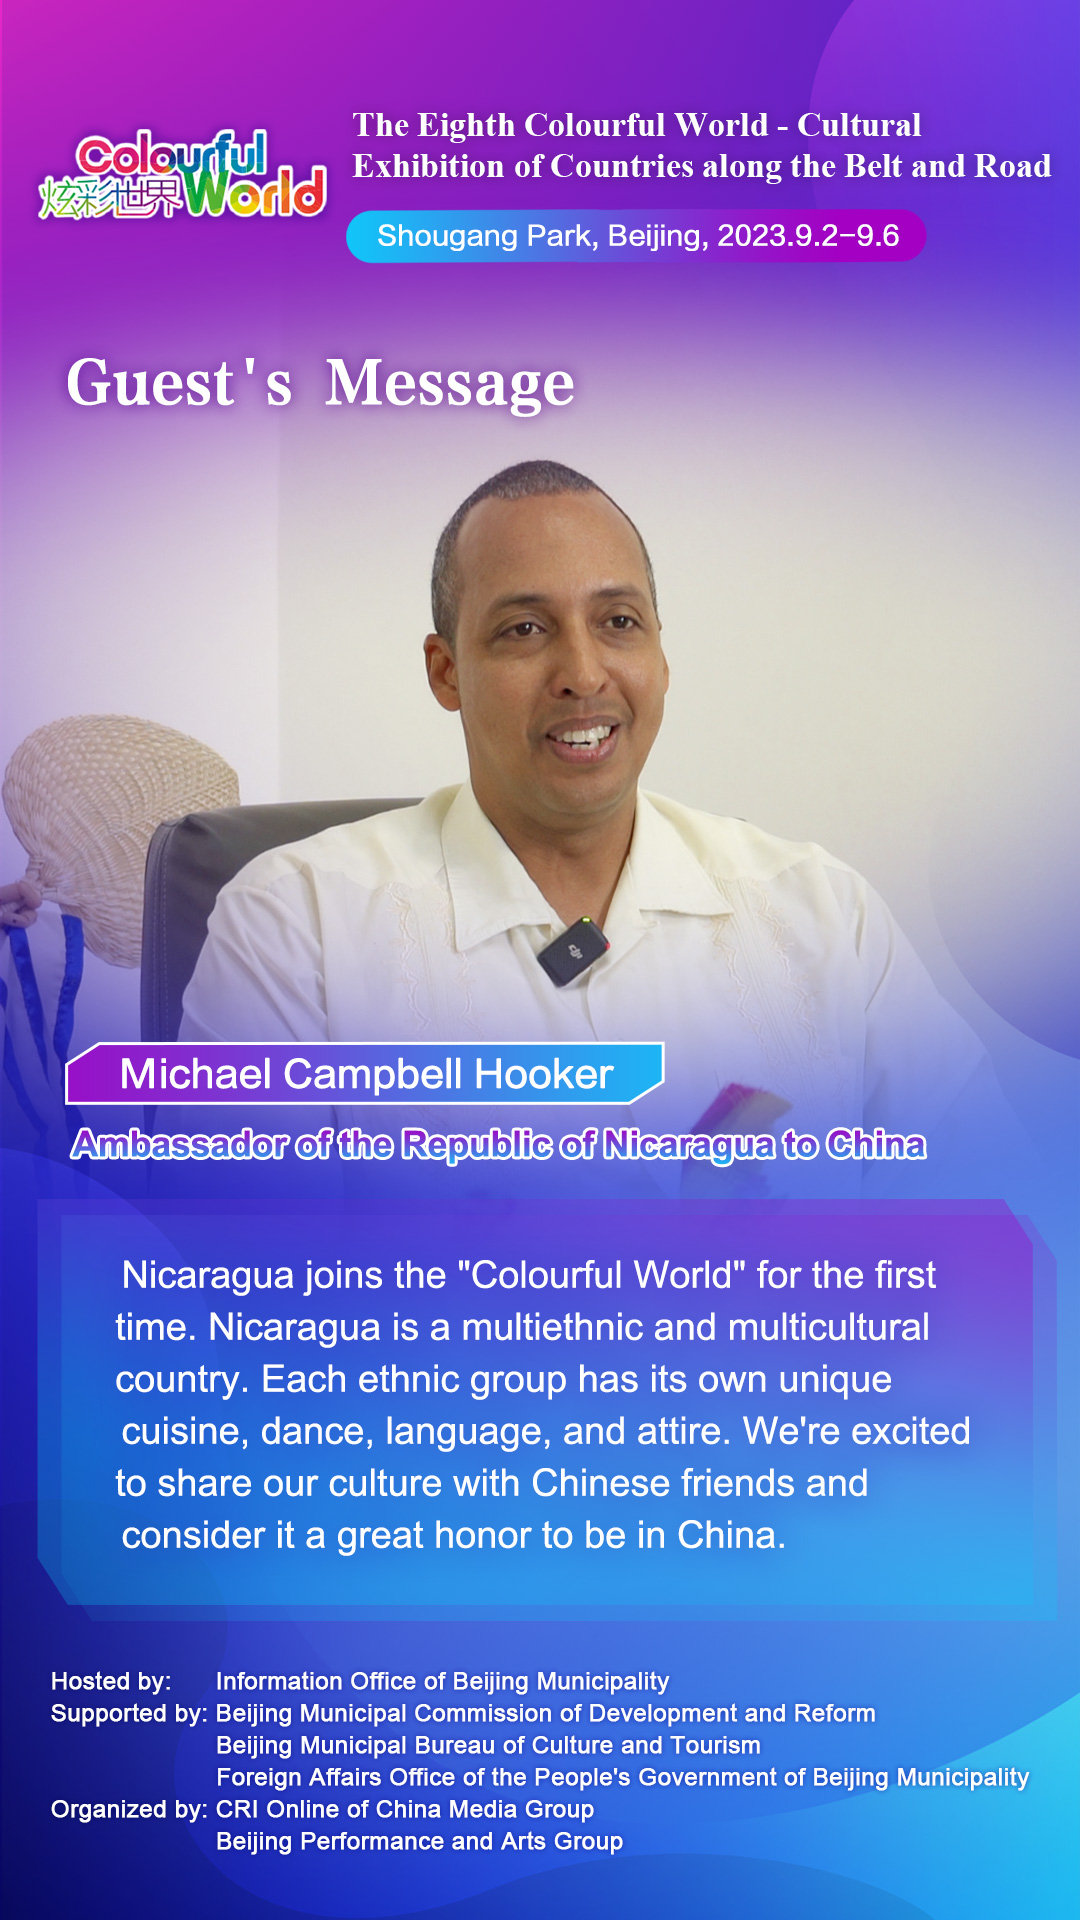 Guest’s Message - Michael Campbell Hooker, Ambassador of the Republic of Nicaragua to China_fororder_第八届“炫彩世界”-金句海报-English-尼加拉瓜(1)